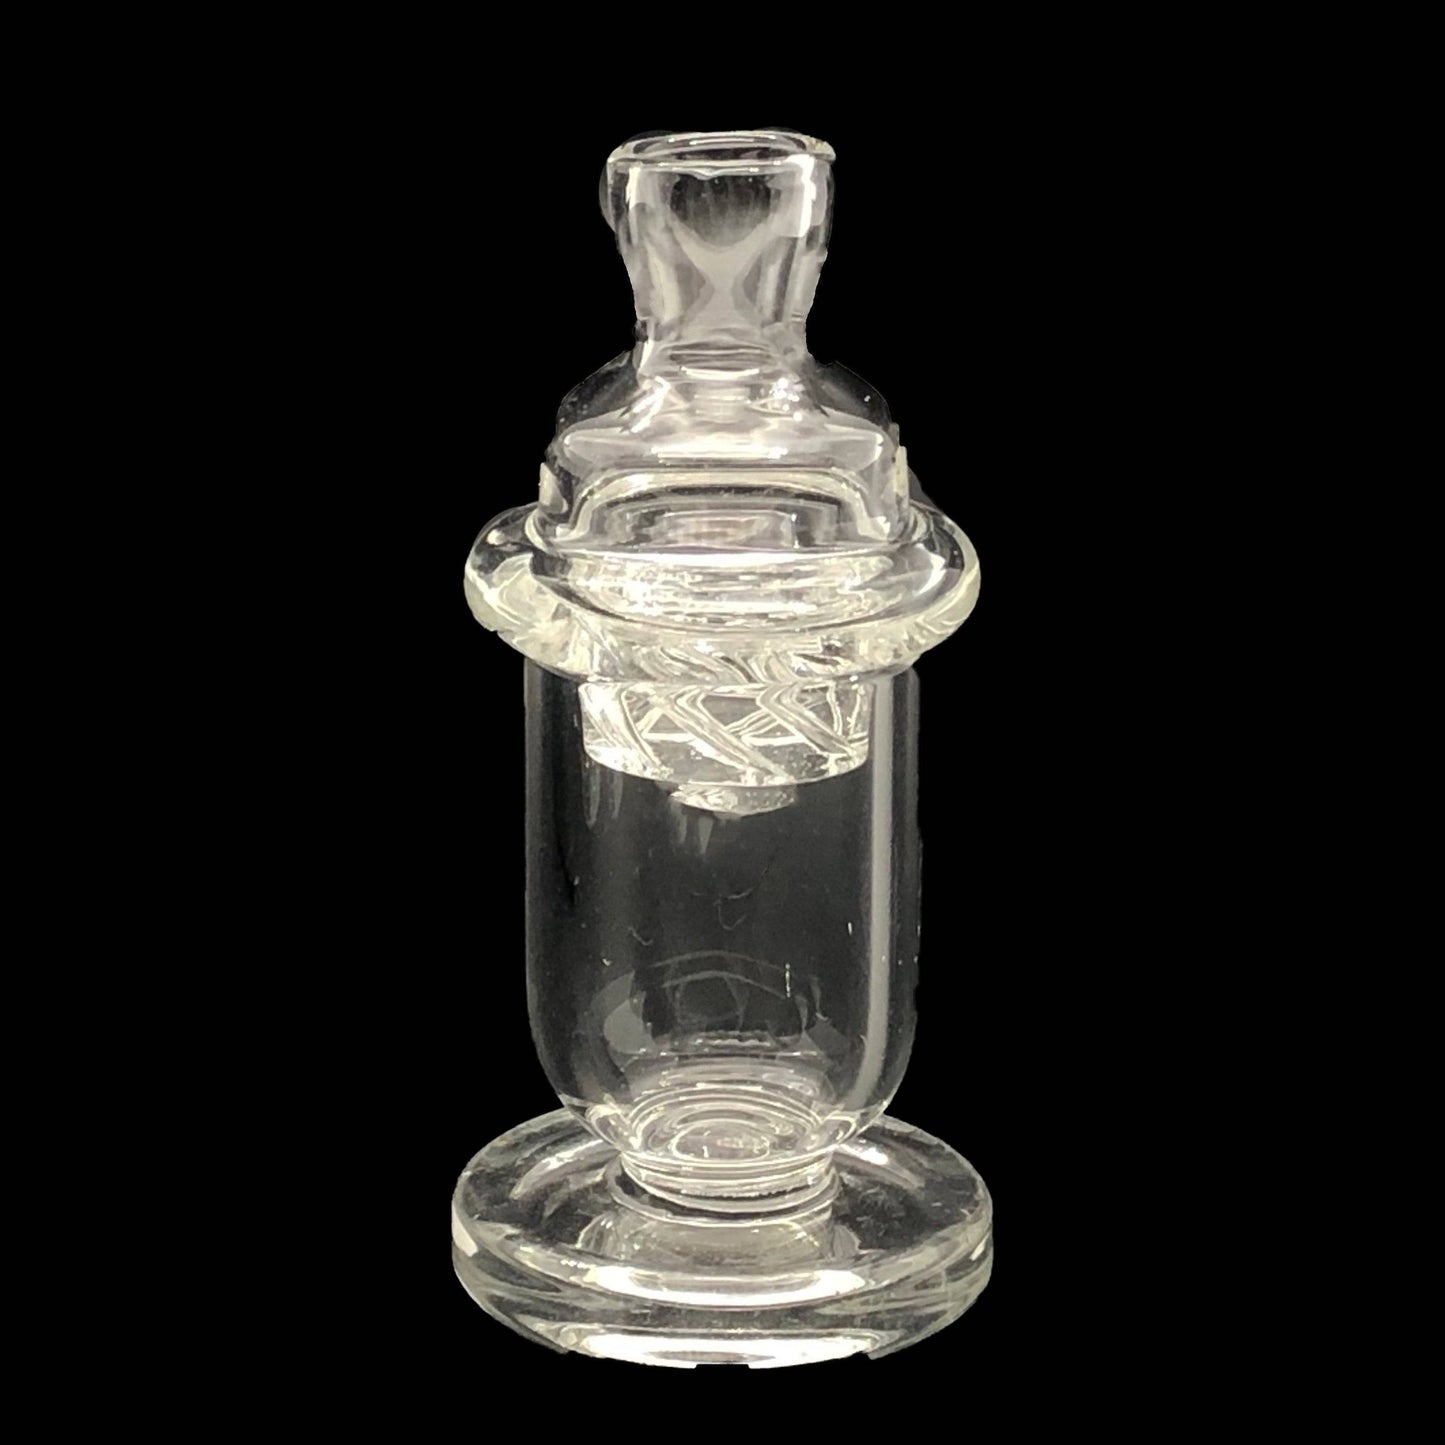 On Point Smoke - Riptide Spinning Carb Cap for 25mm Quartz Bangers - OPS.com